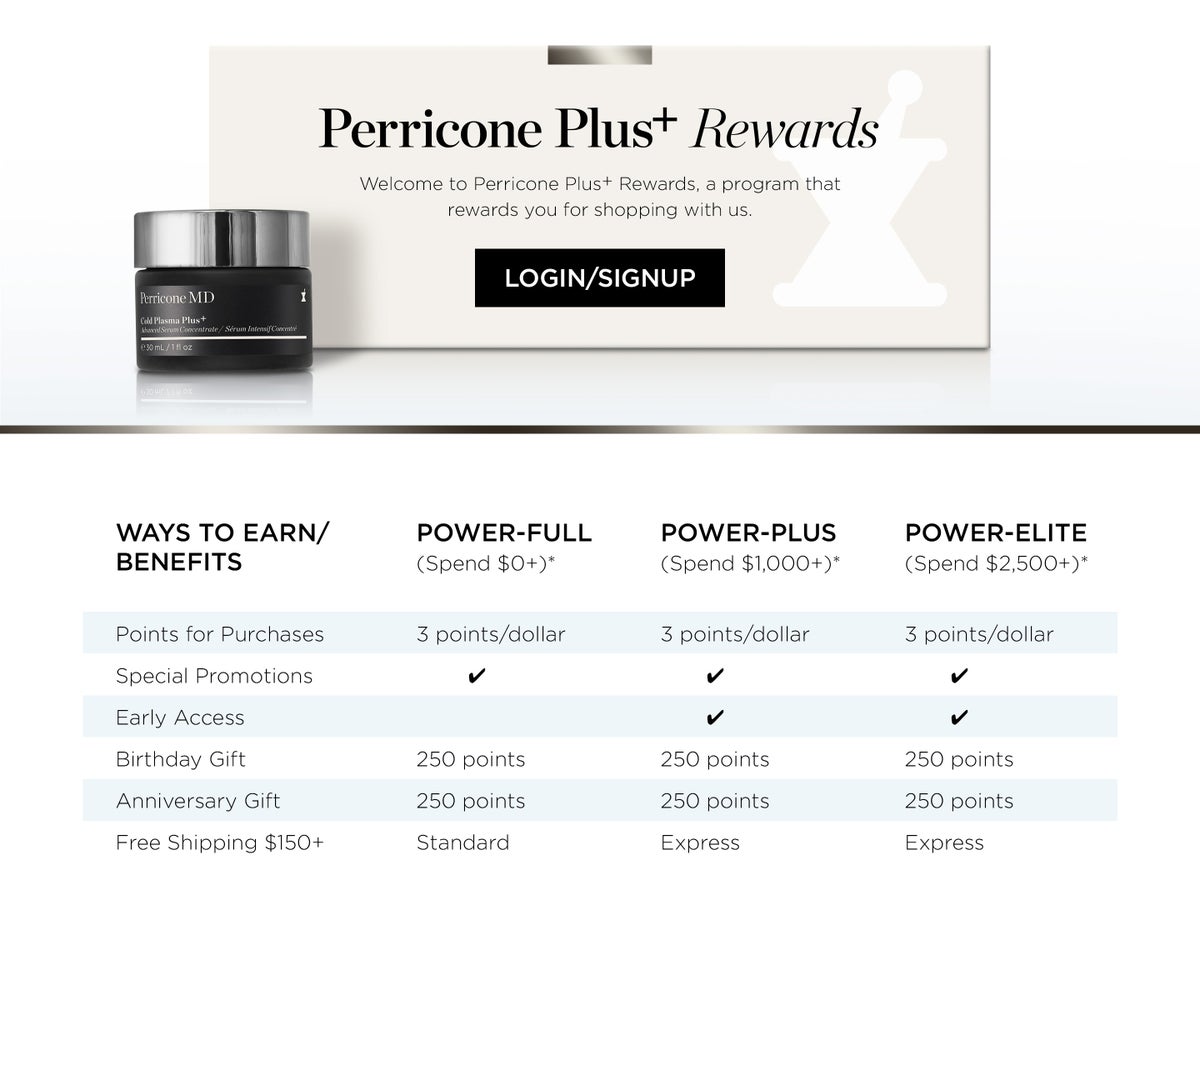 Welcome to Perricone Plus+ Rewards, a program that rewards you for shopping with us.